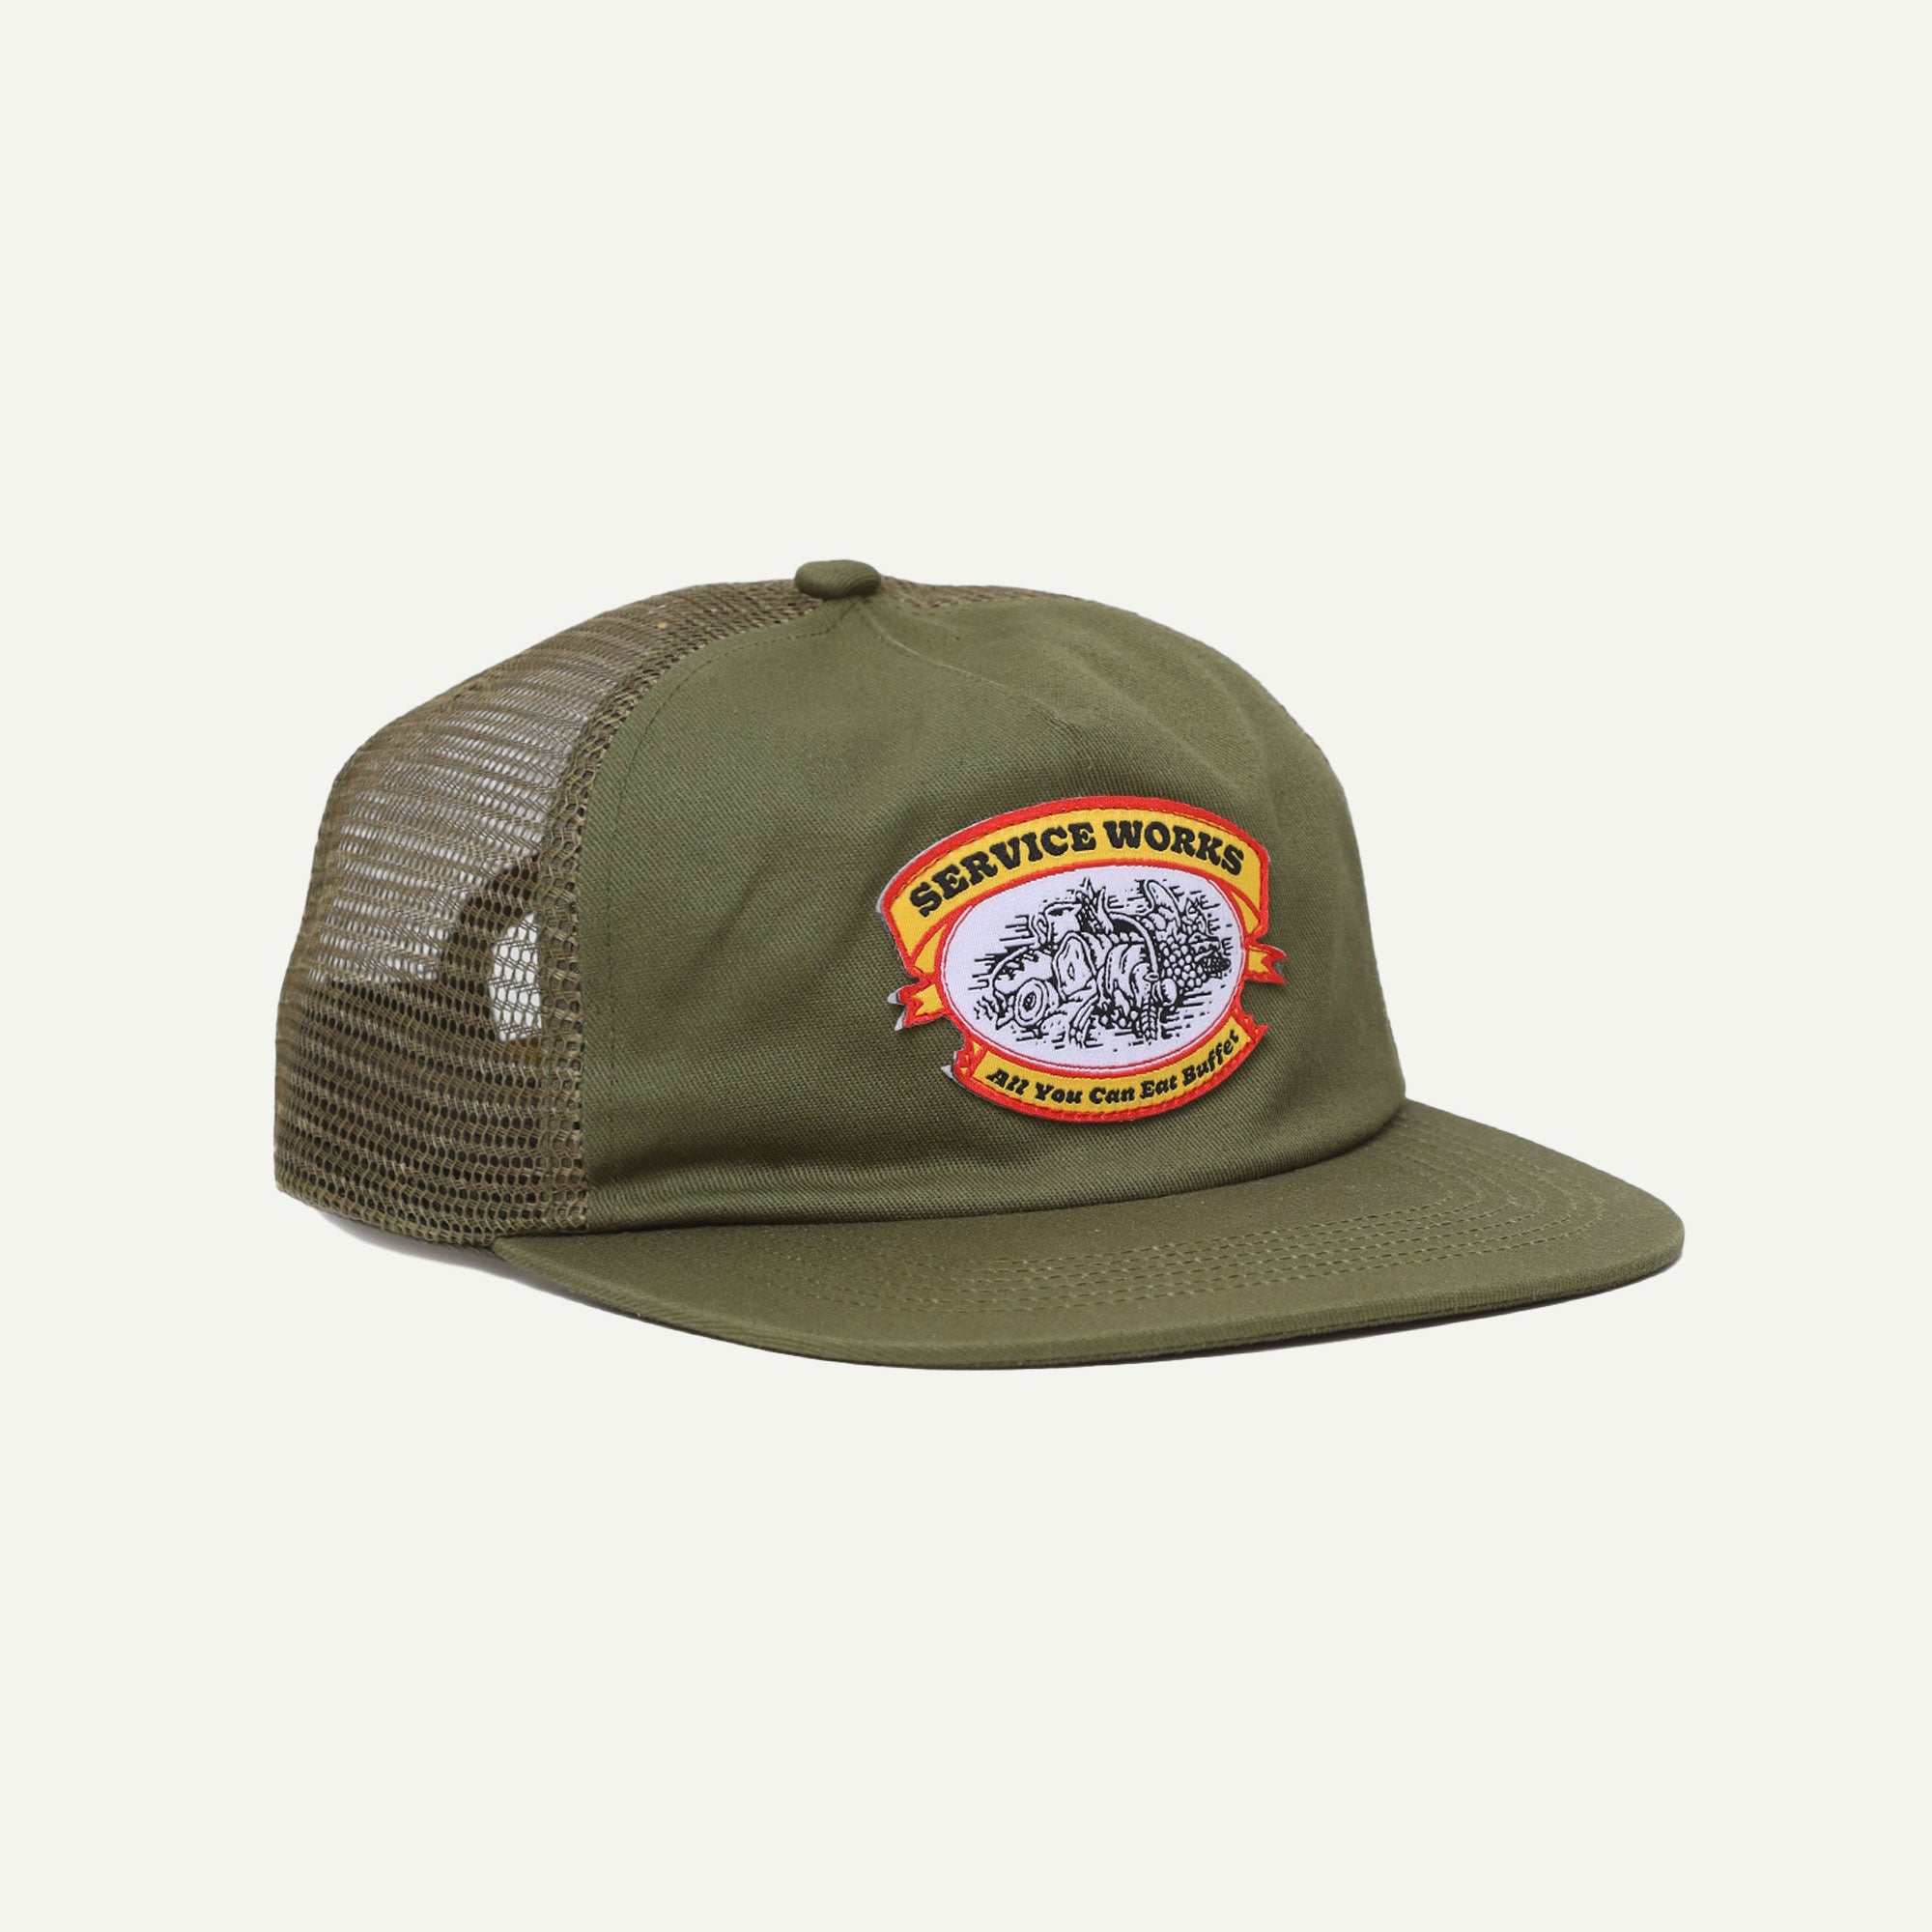 Service Works Olive All You Can Eat Trucker Cap